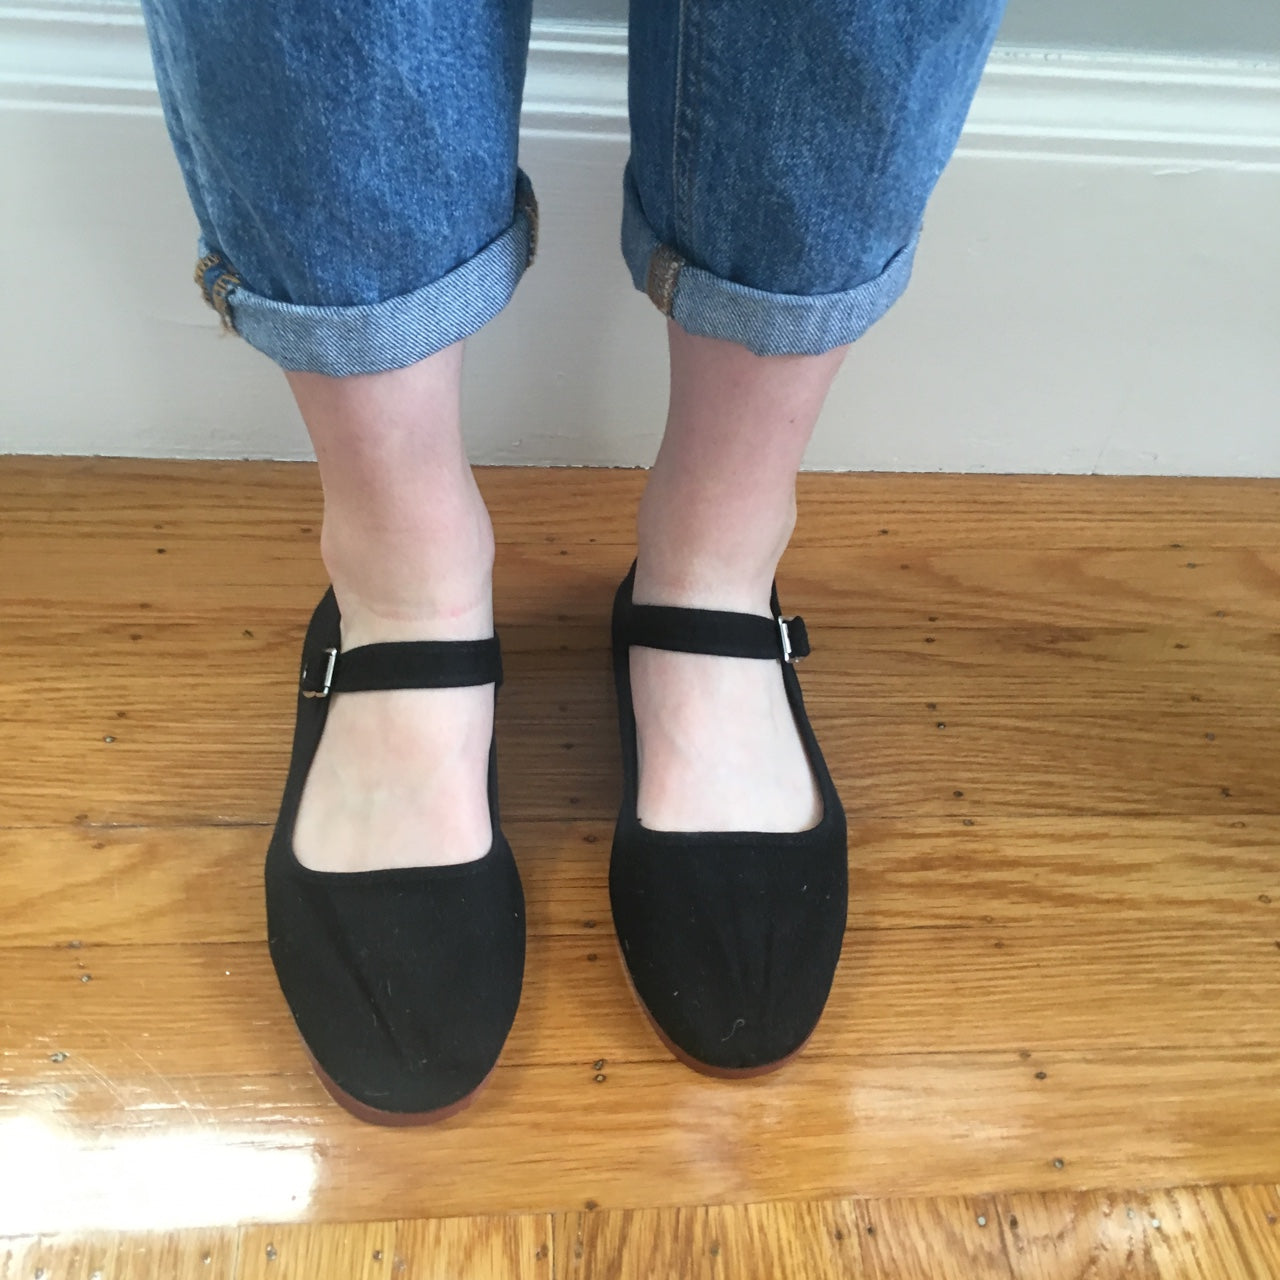 Handsewn Mary Jane Flats   by Veronique